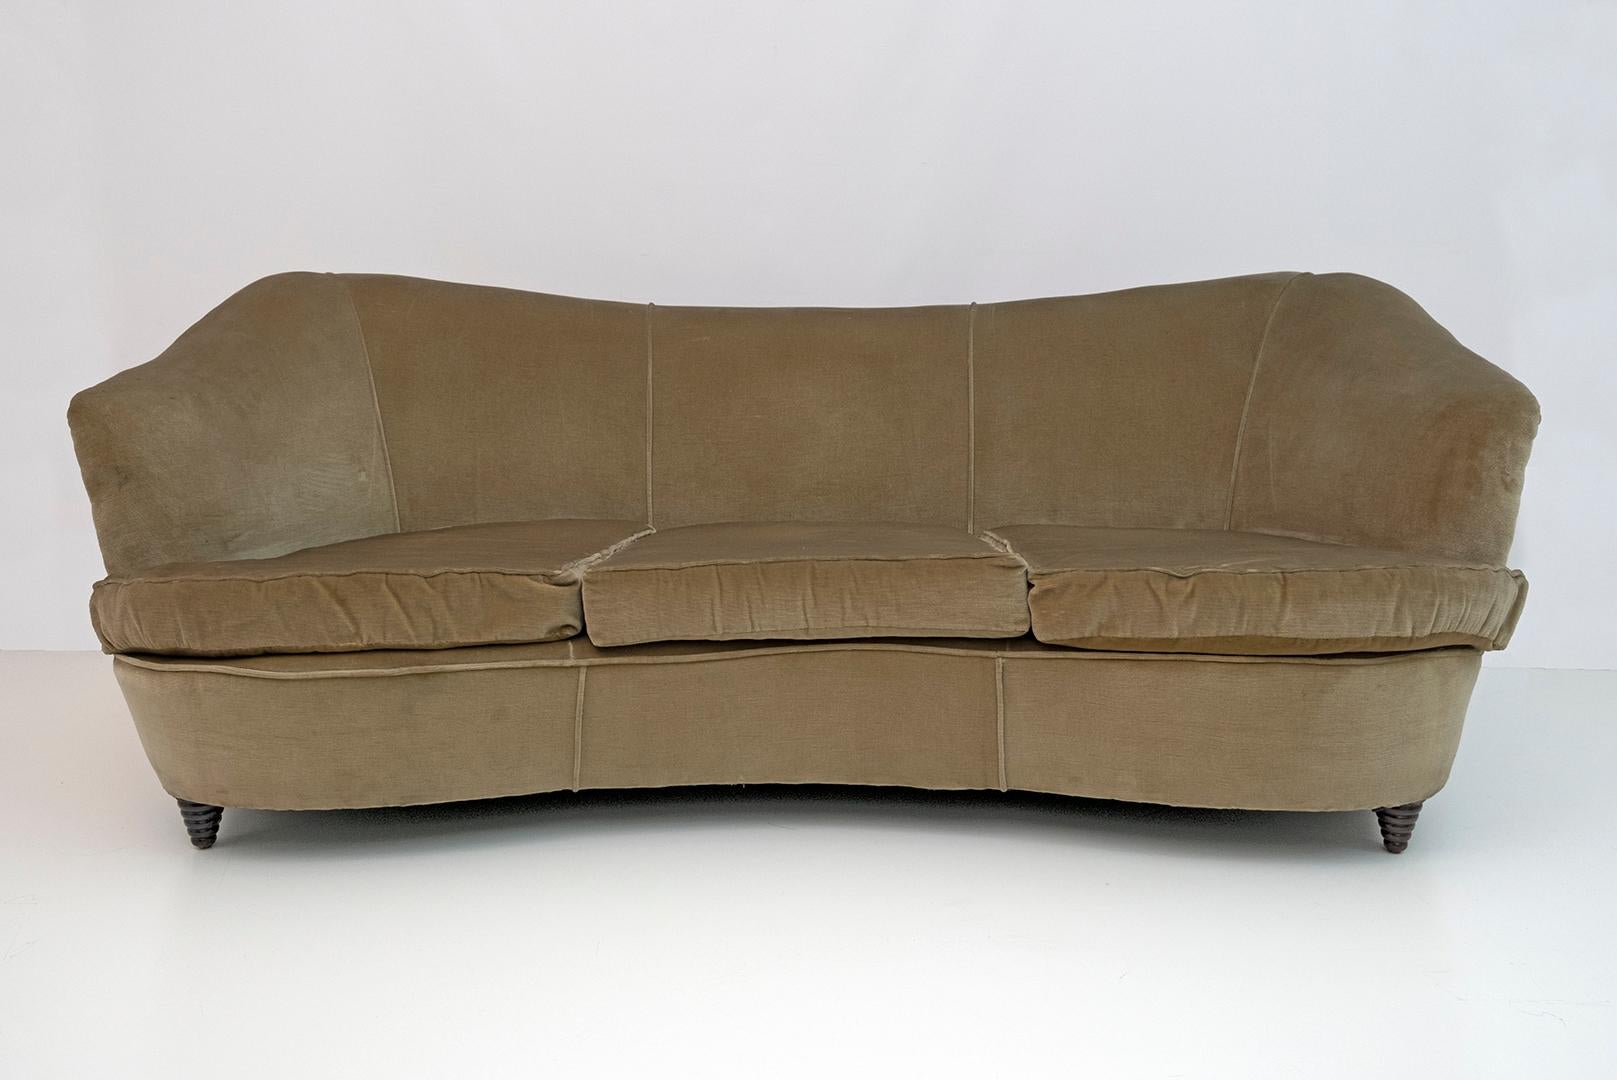 Three seater sofa designed by Ico Parisi for Ariberto Colombo Cantu, 1950s production.
Very elegant and comfortable, upholstery and cushions to be redone.